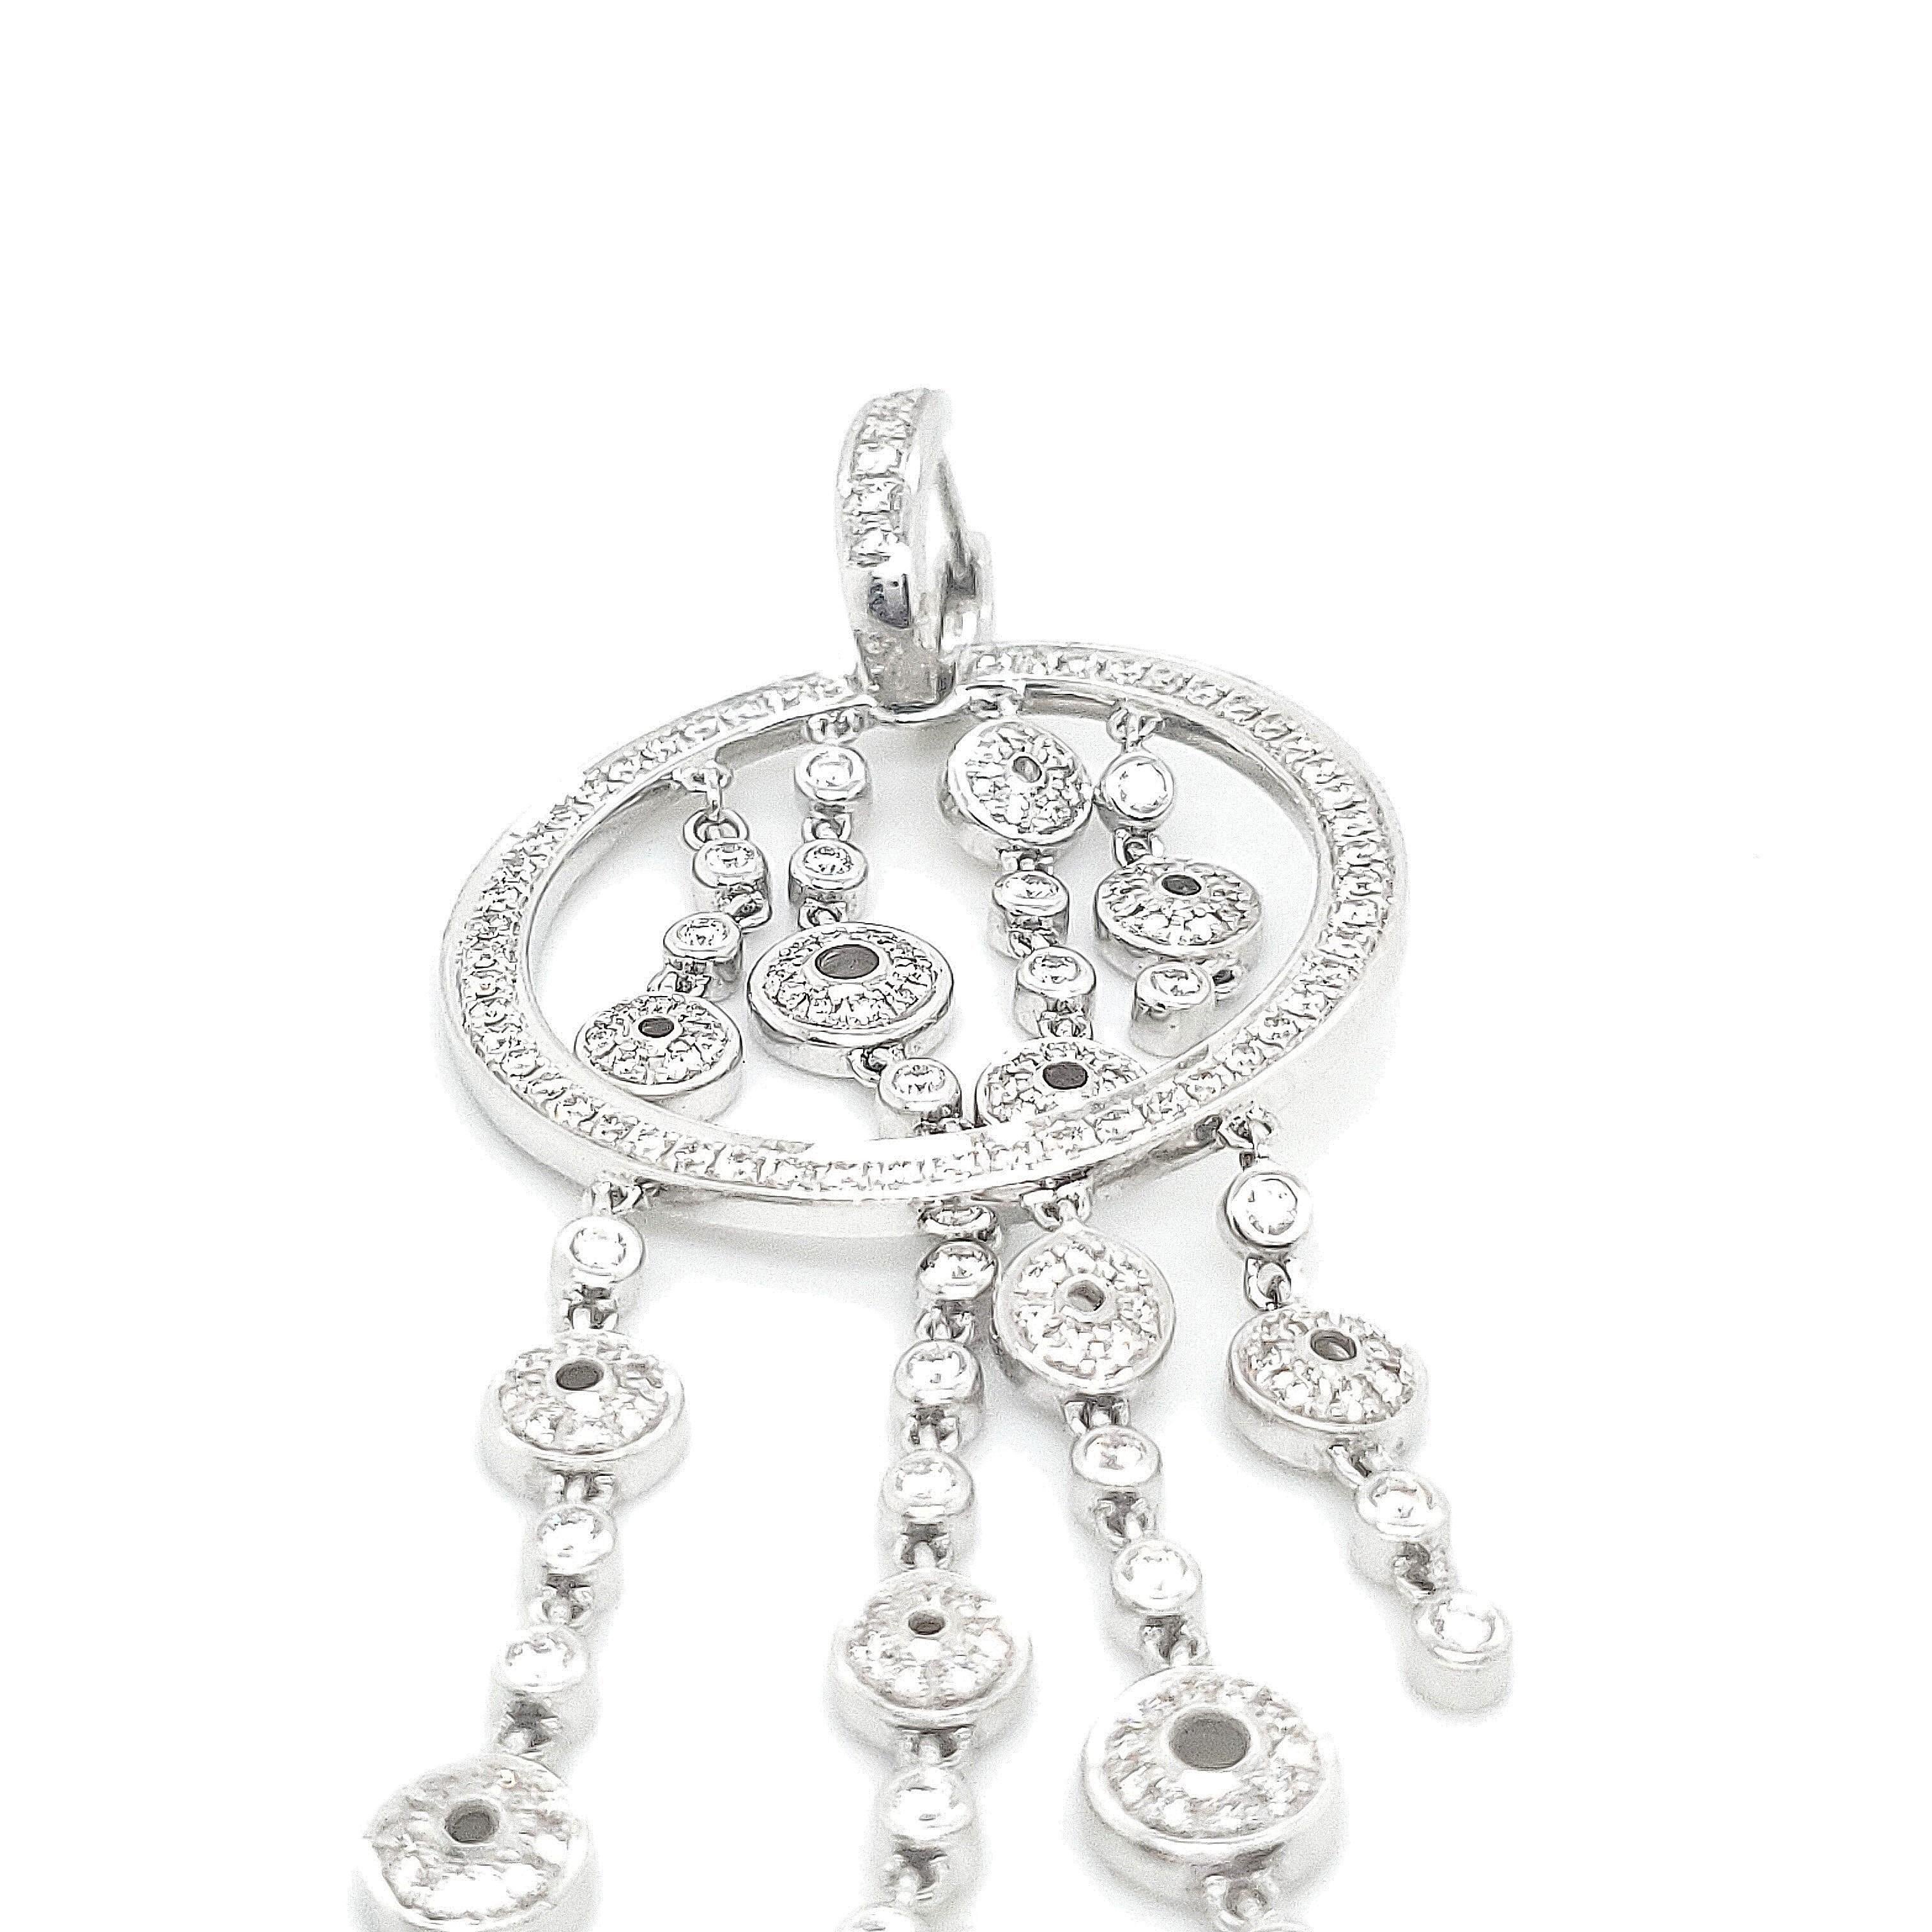 Authentic Di Modolo Tempia collection earrings made in 18 karat white gold with approximately 320 round brilliant diamonds weighing an estimated 2.70ct.  3 inches in length, signed Di Modolo.  CIRCA 21st Century